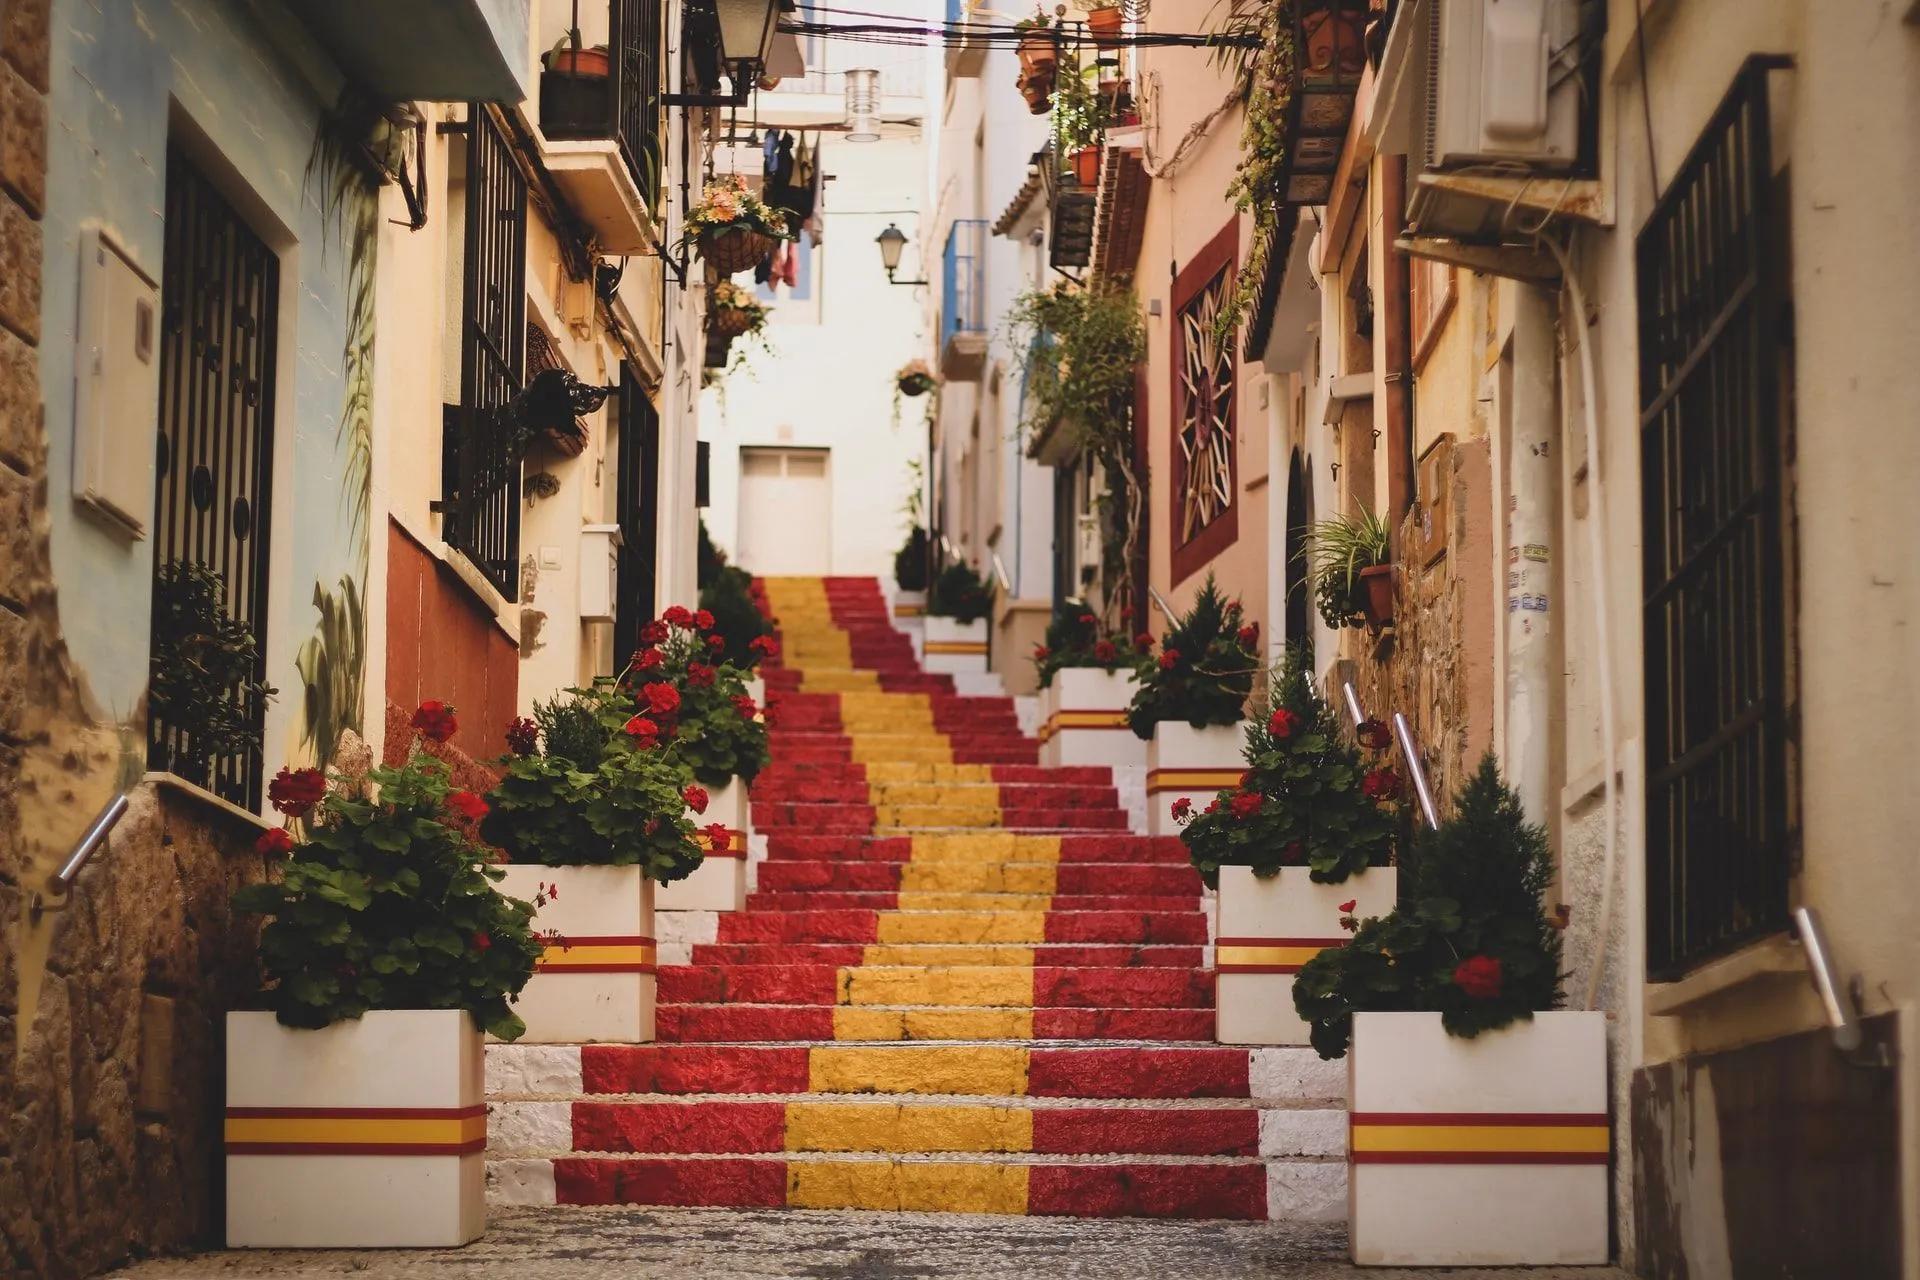 A red,yellow painted stairs in an alley in Spain